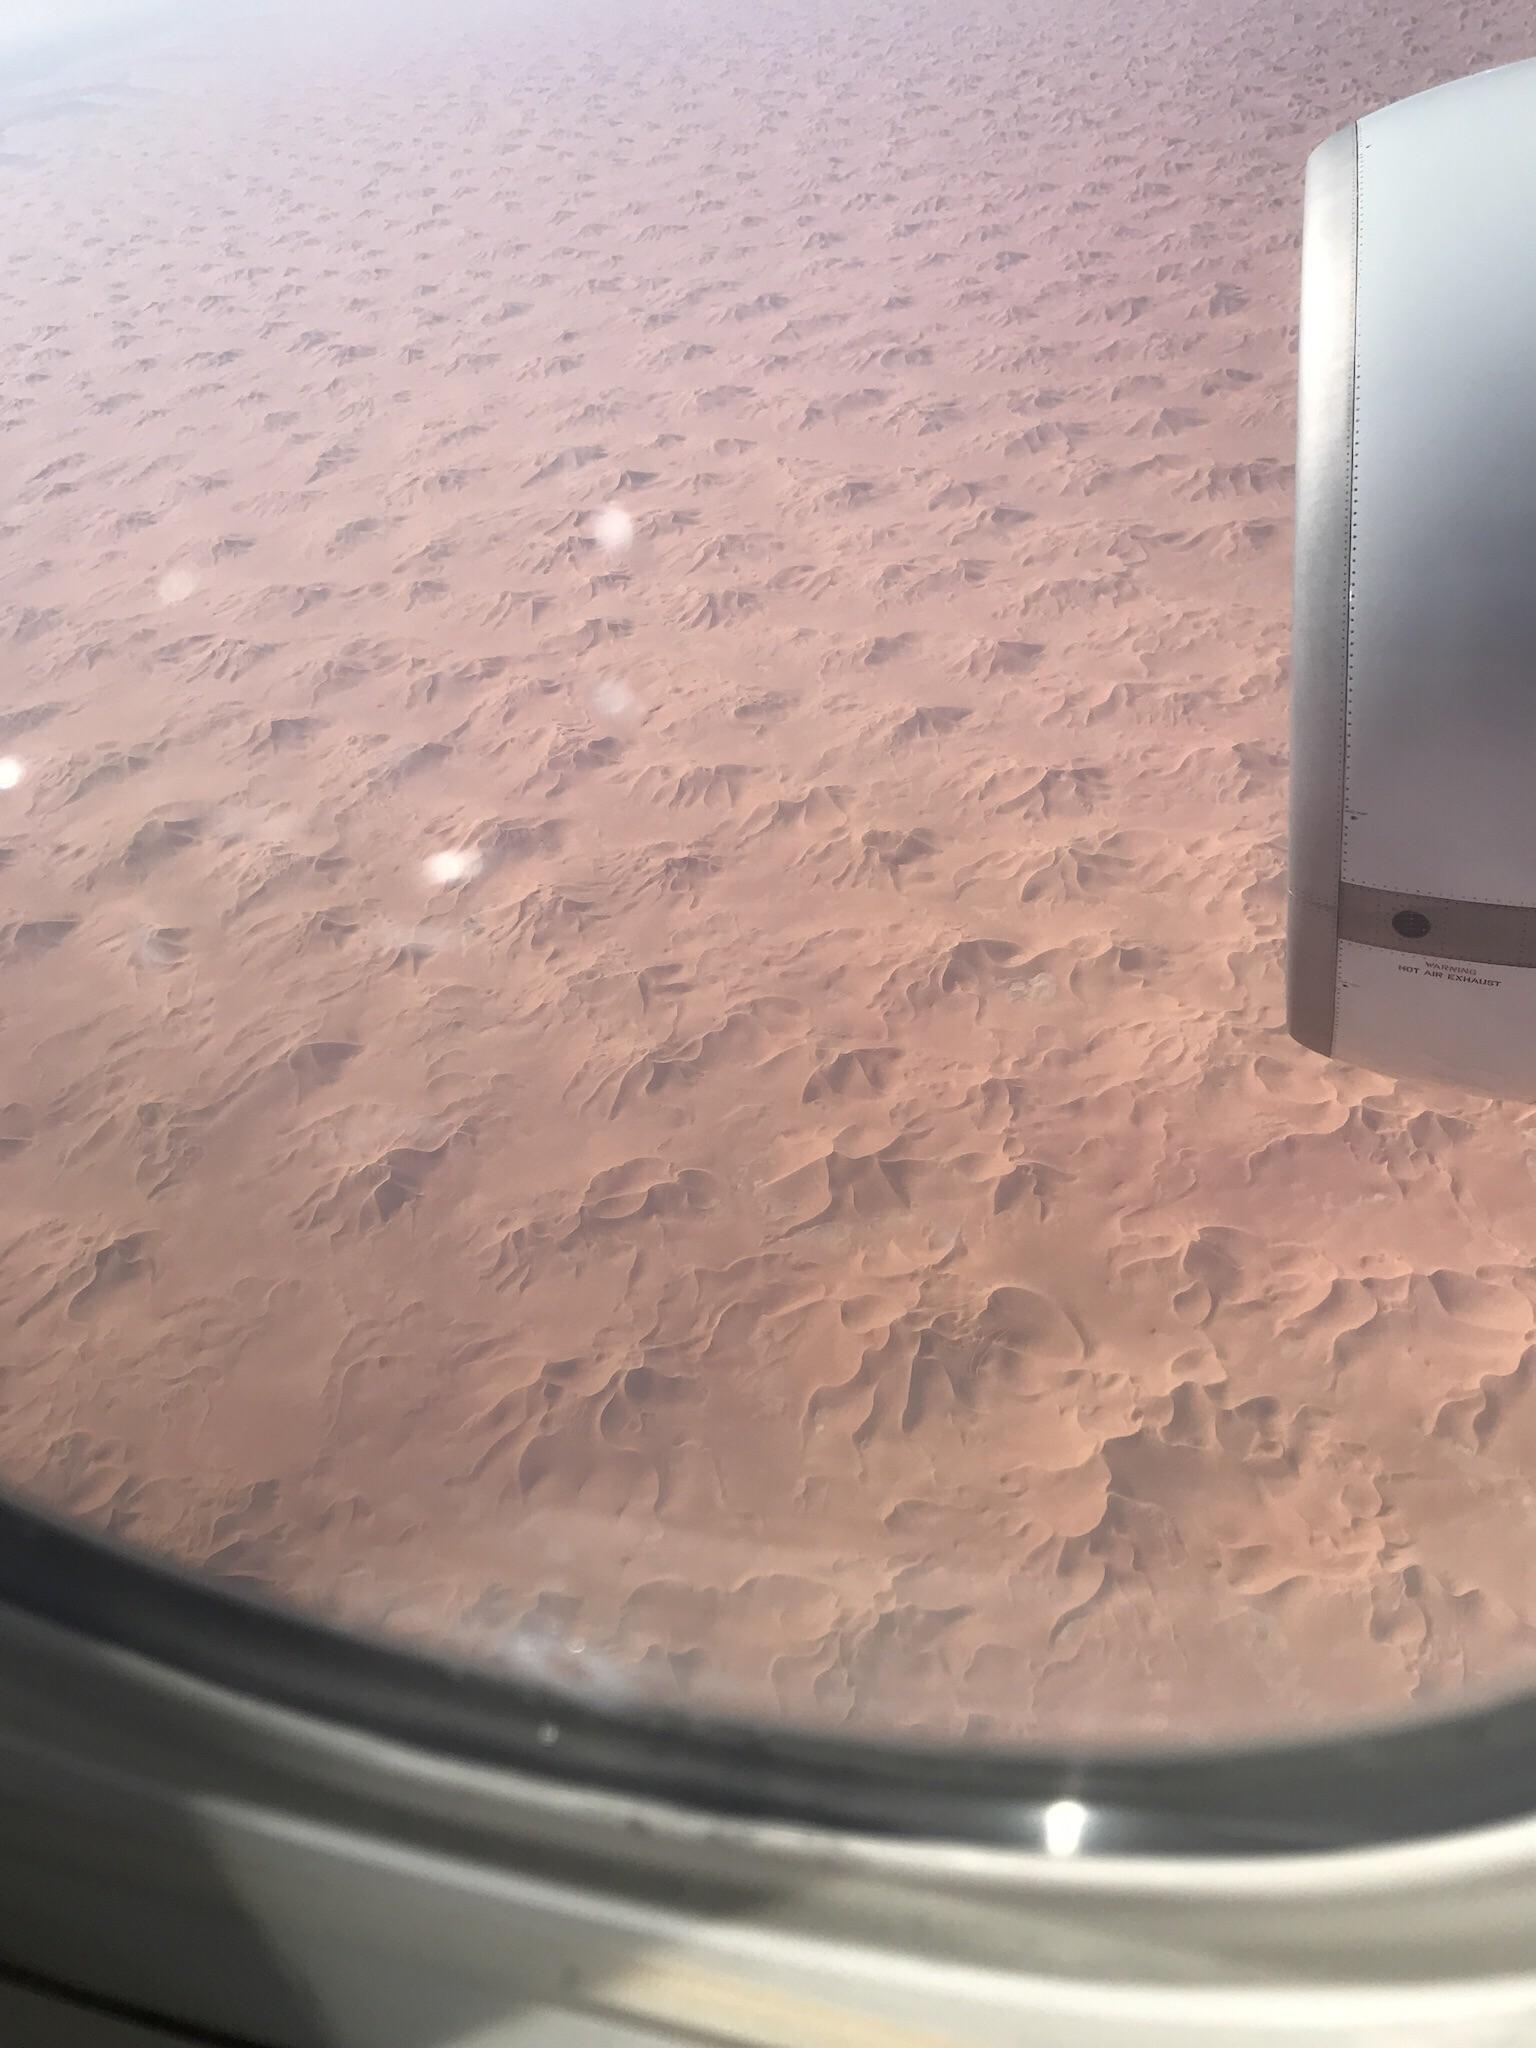 Like, God's texture mapping on the Sahara is a little repetitive